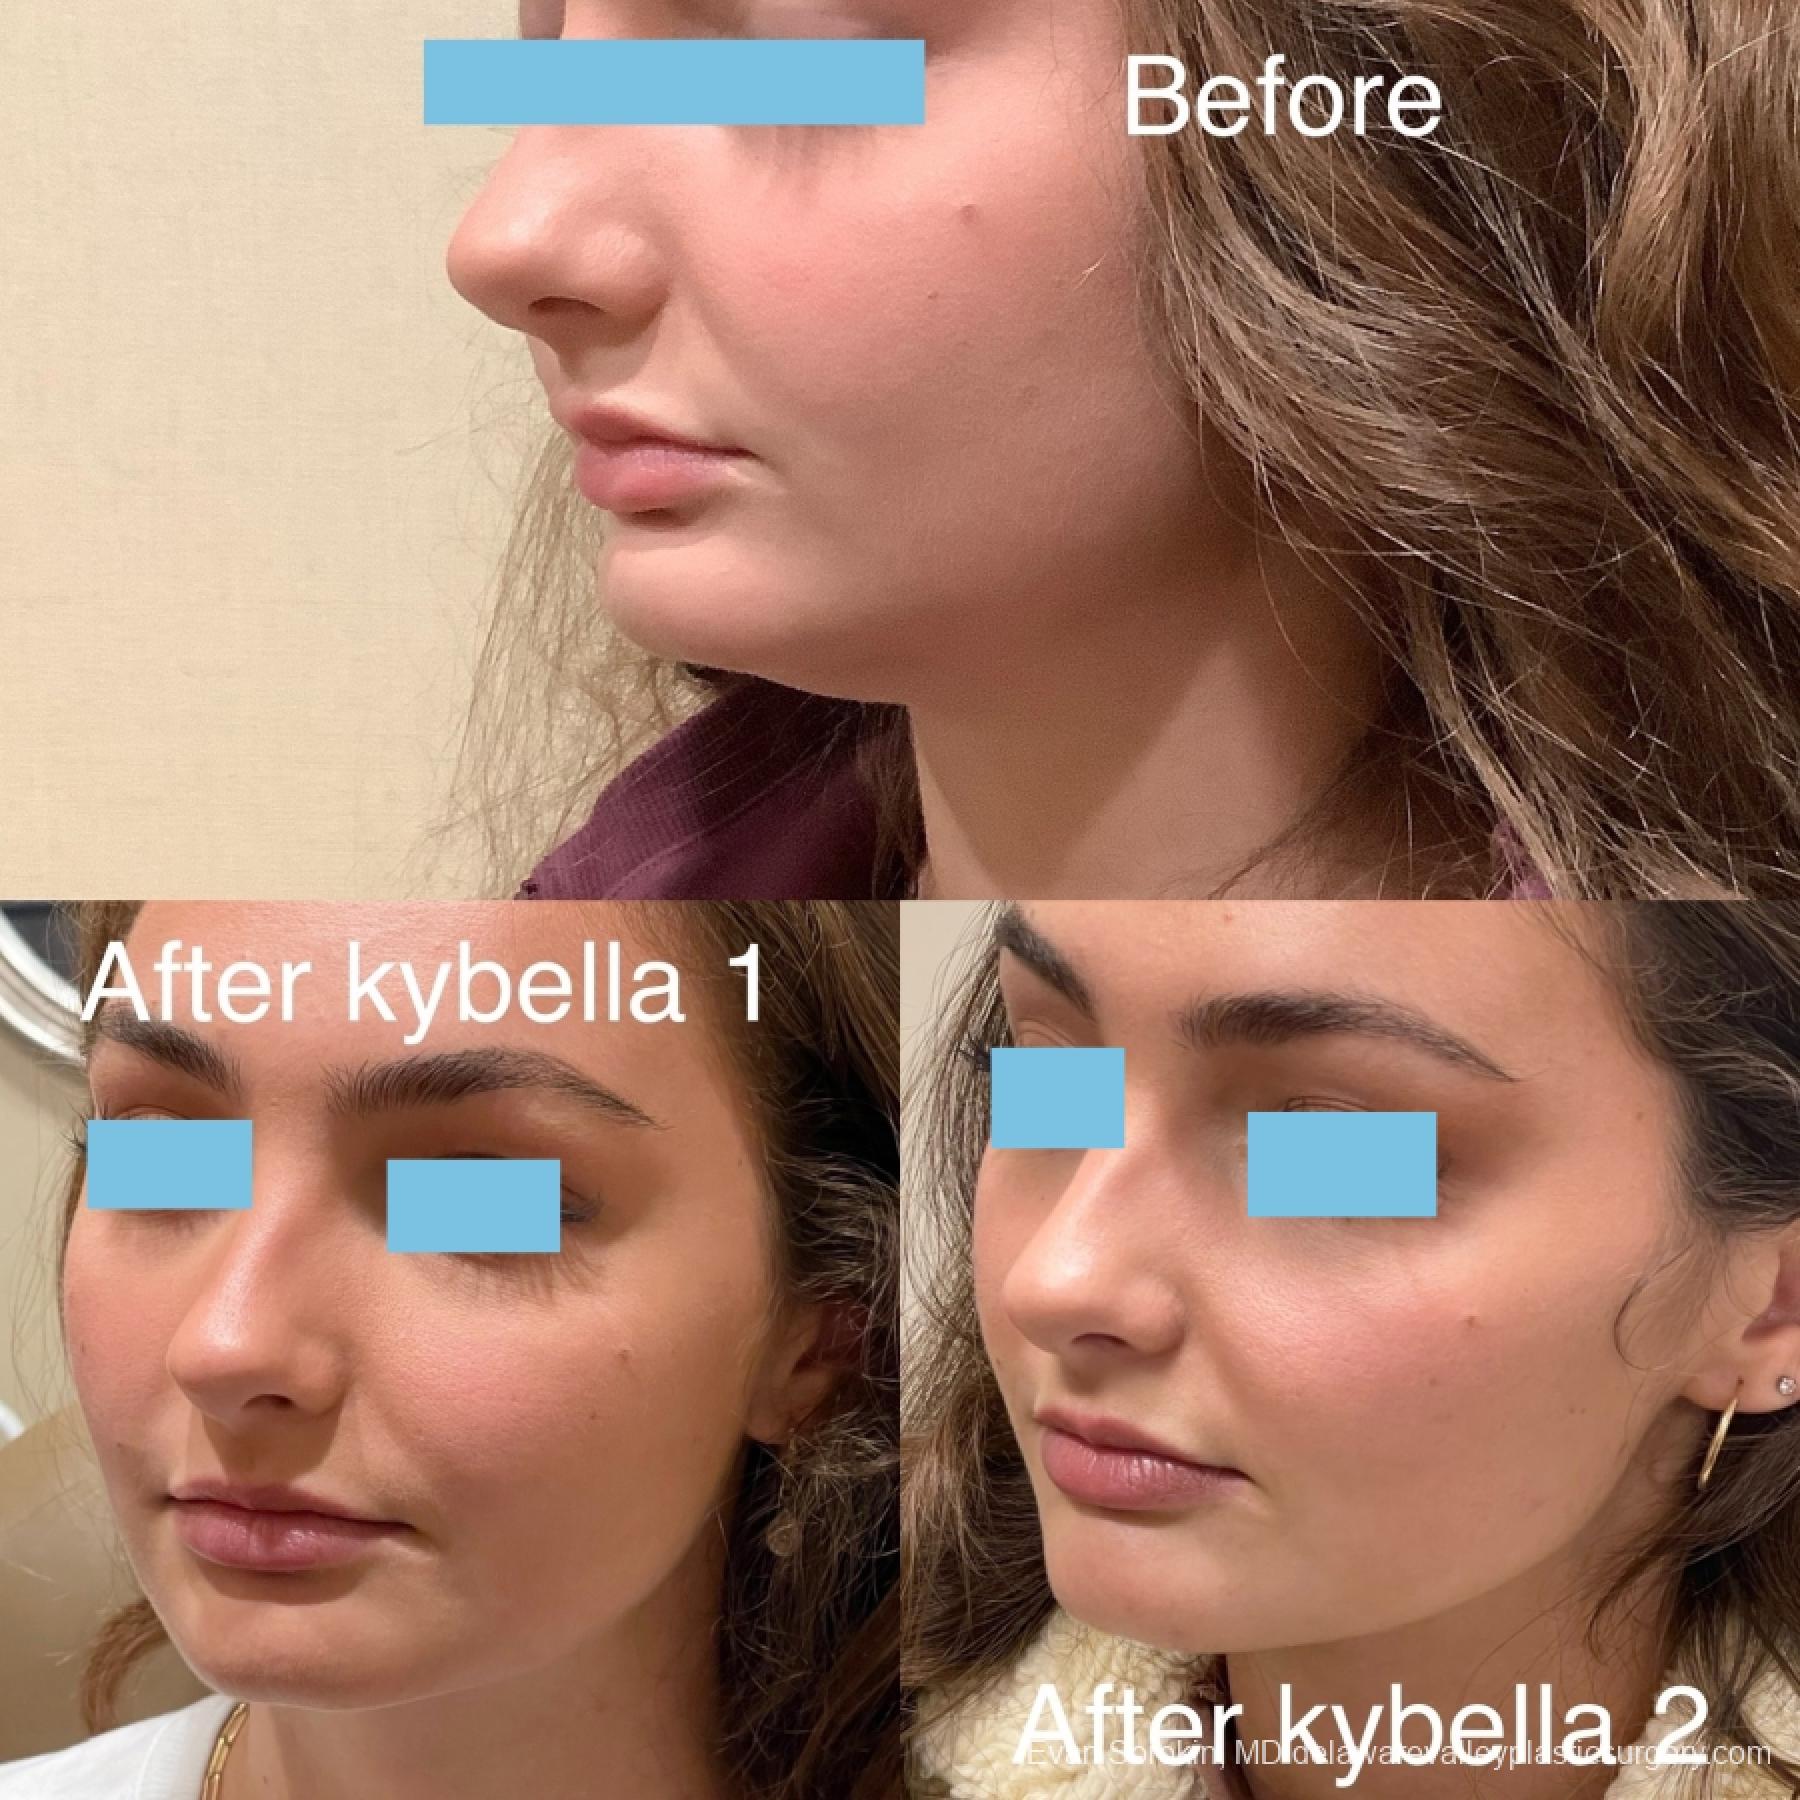 Kybella: Patient 1 - Before and After 3